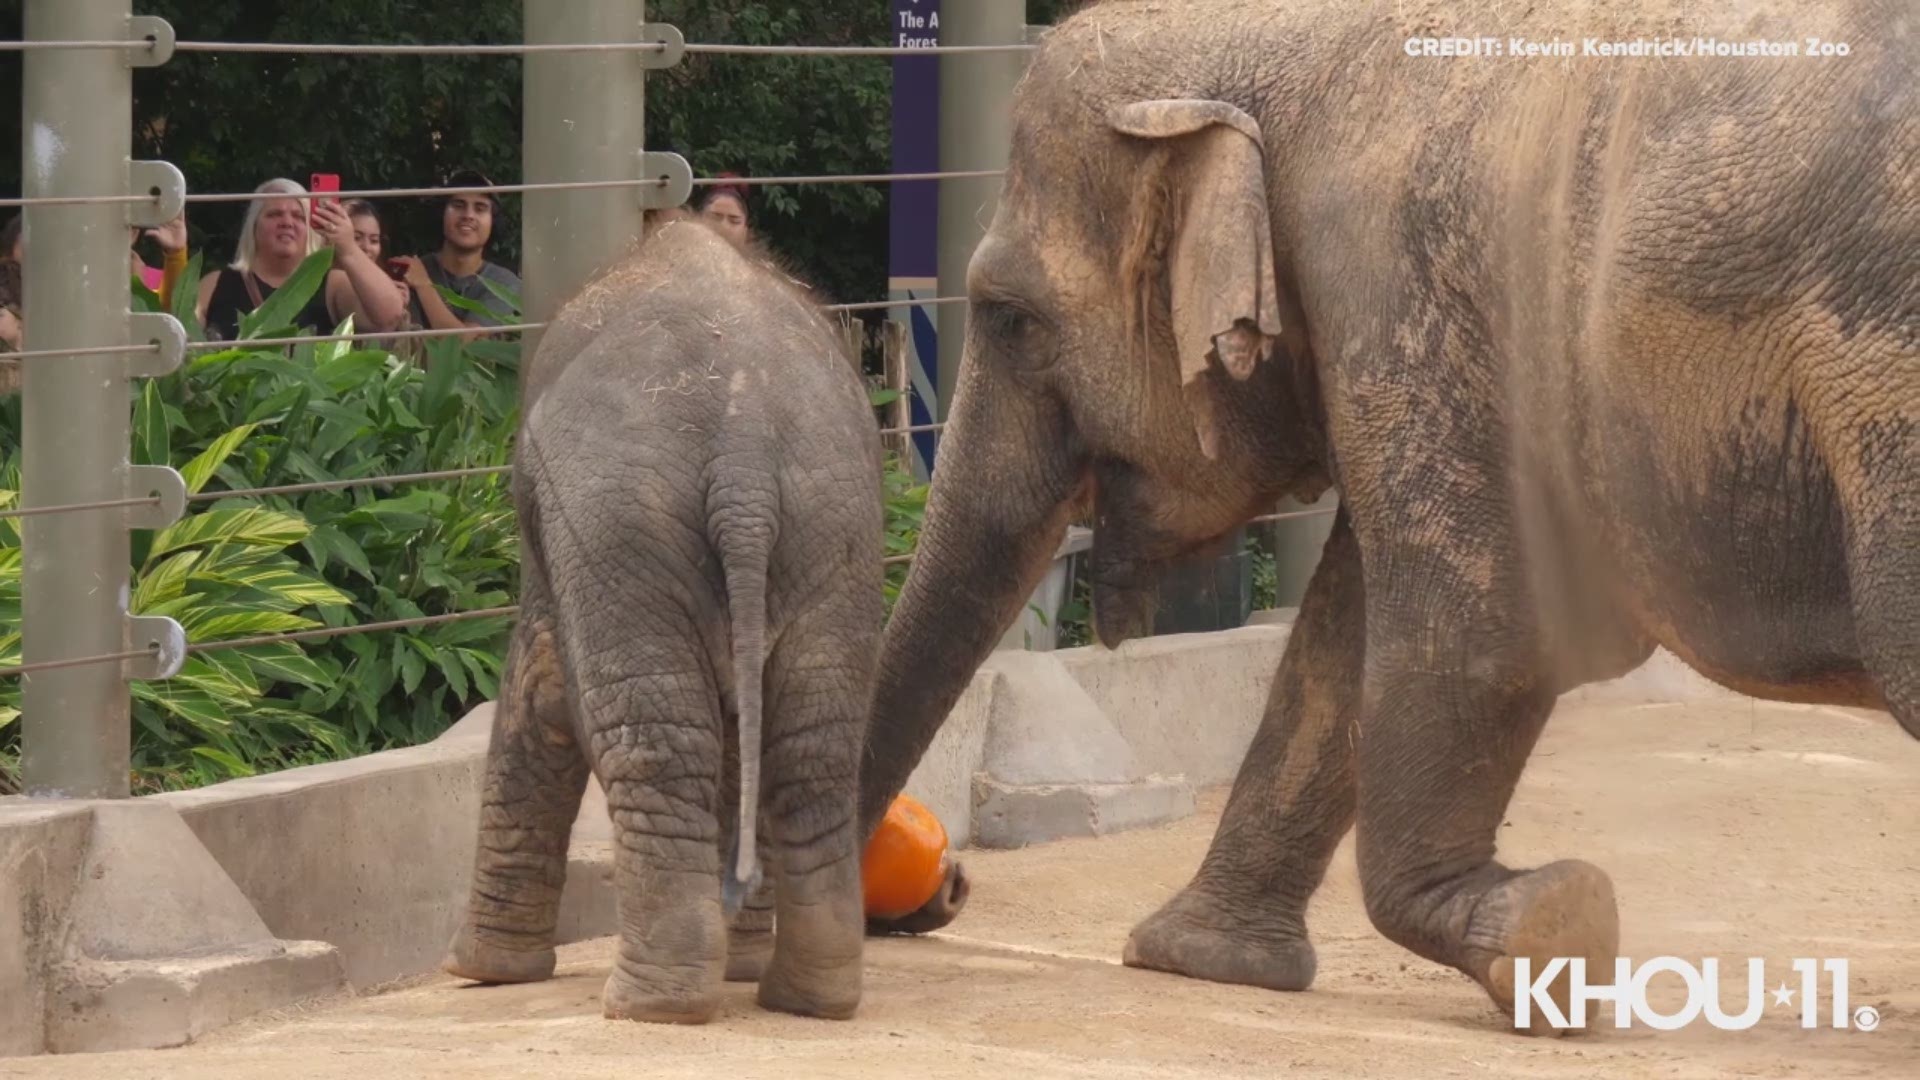 The elephants particularly enjoy smashing and eating pumpkins as a tasty snack and can even crush an entire pumpkin with just one bite.